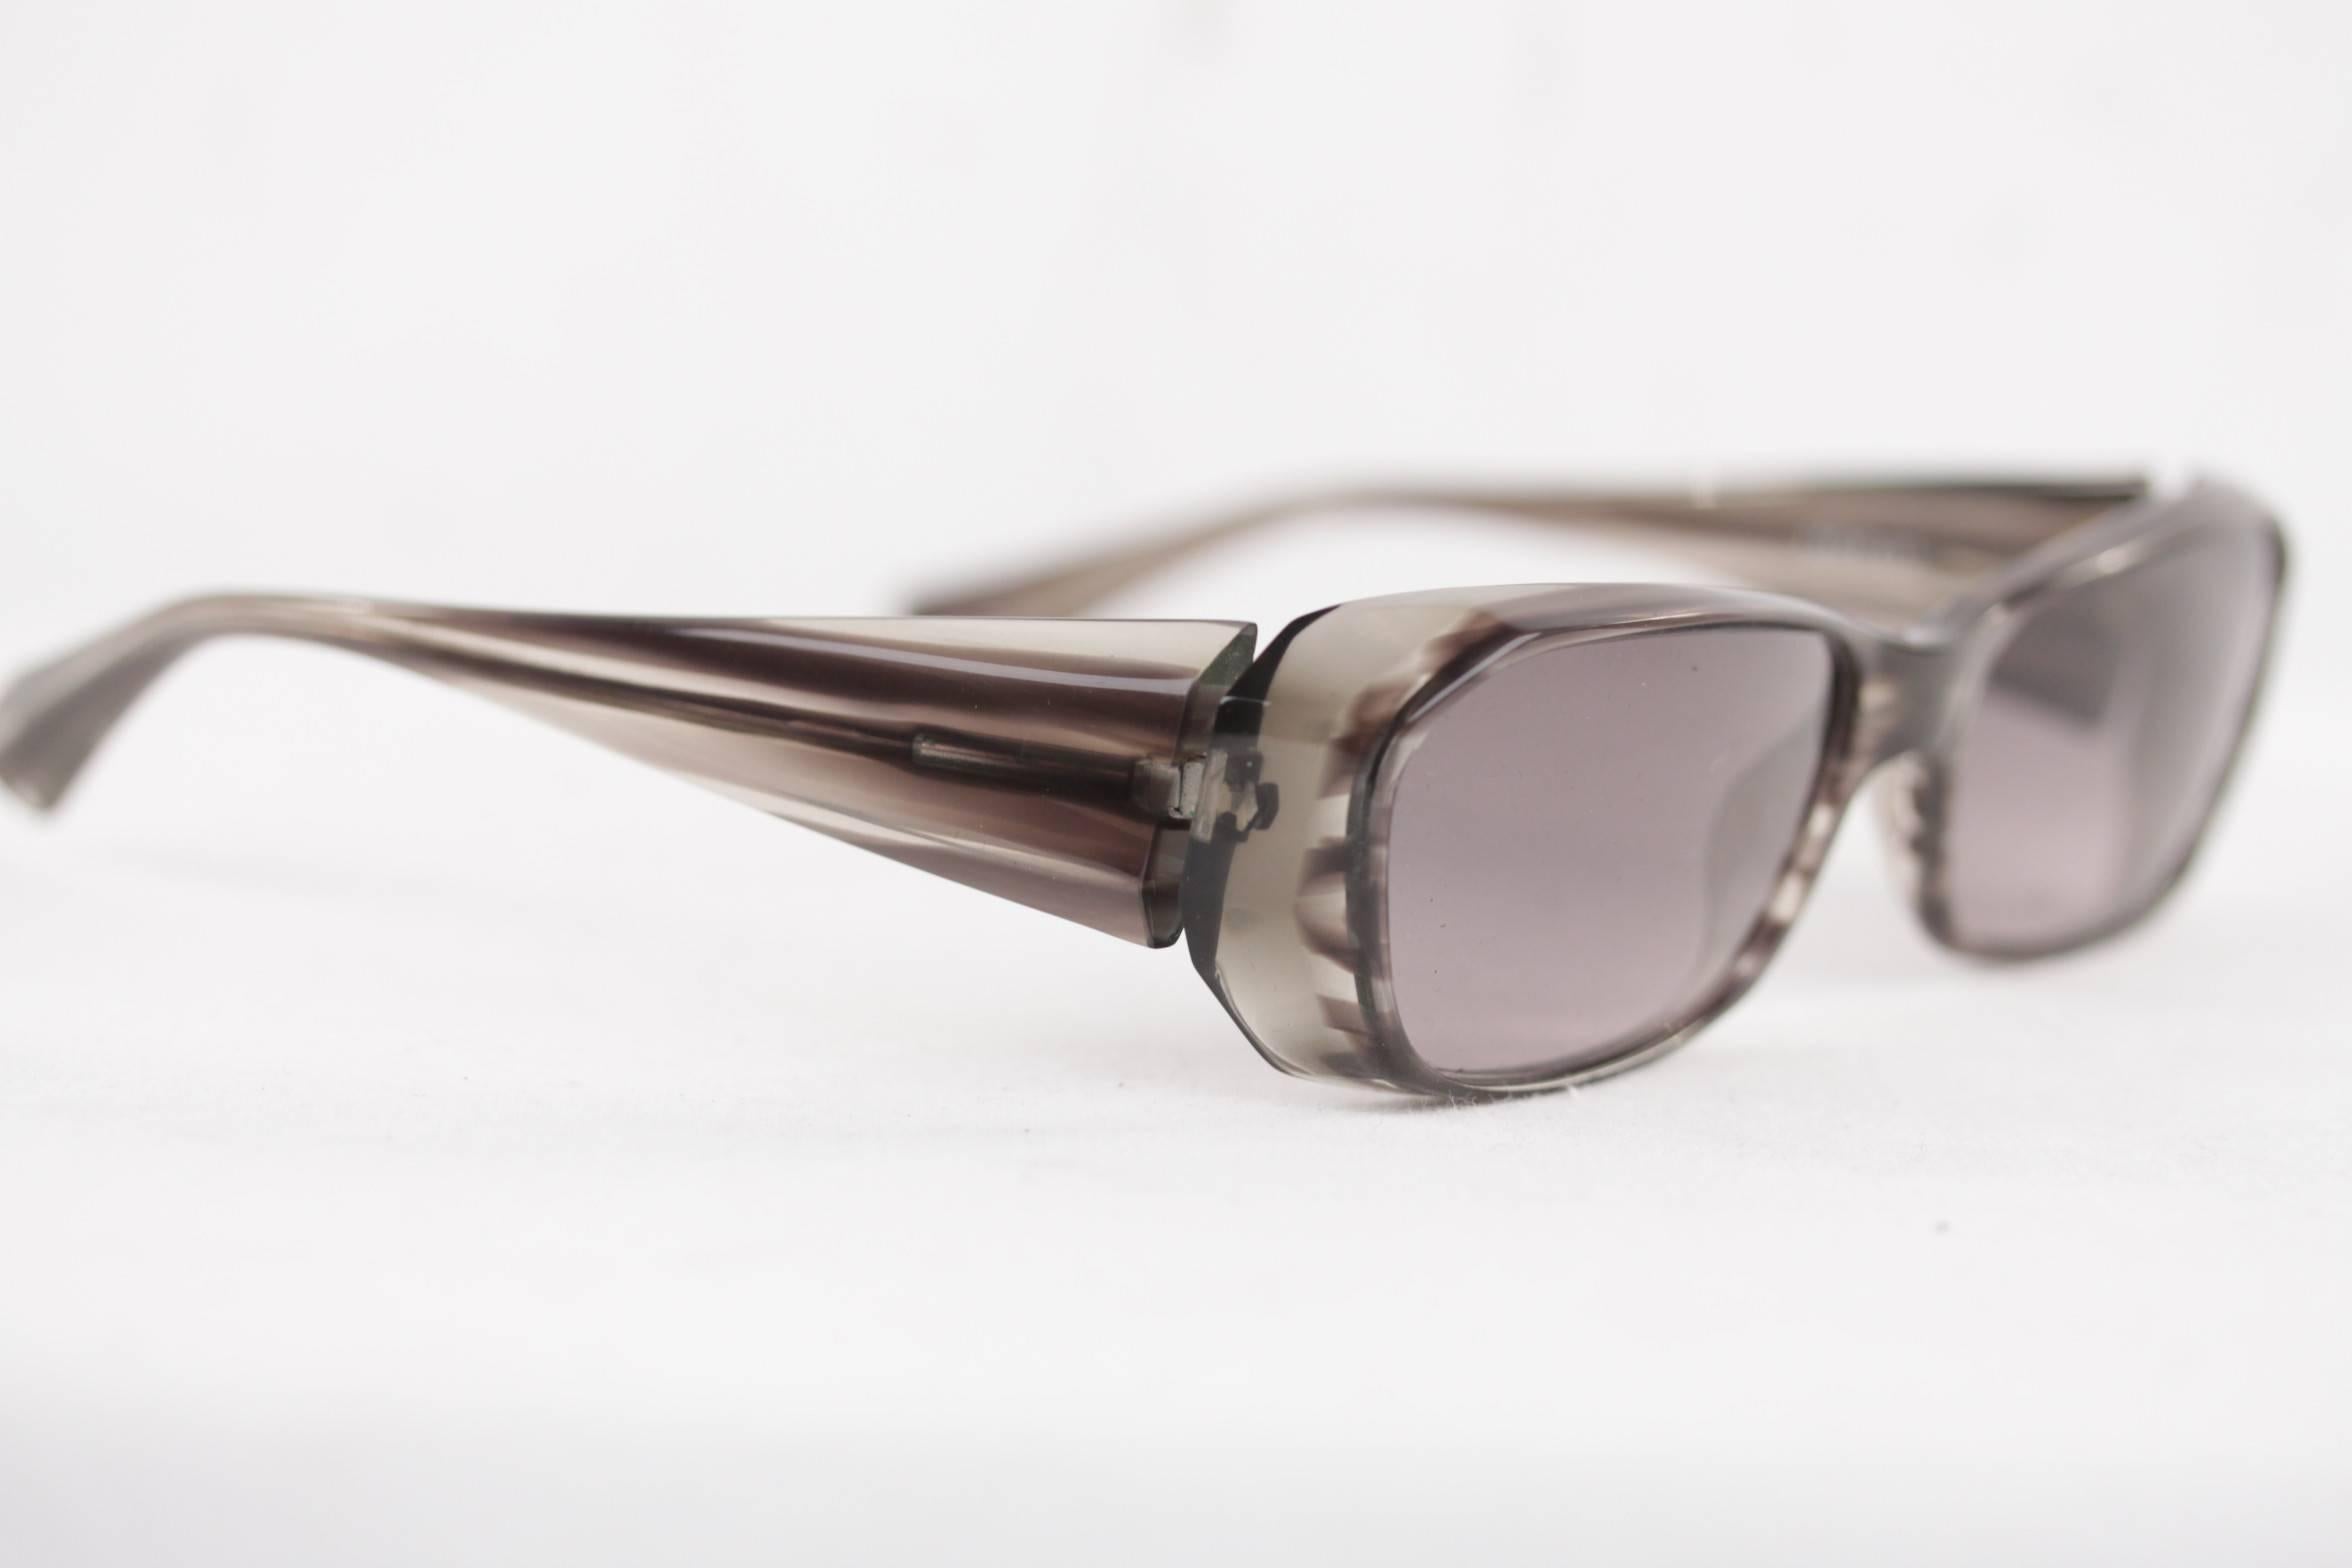 ALAIN MIKLI paris vintage sunglasses A0323-03 gray frame EYEWEAR w/CASE In Excellent Condition In Rome, Rome